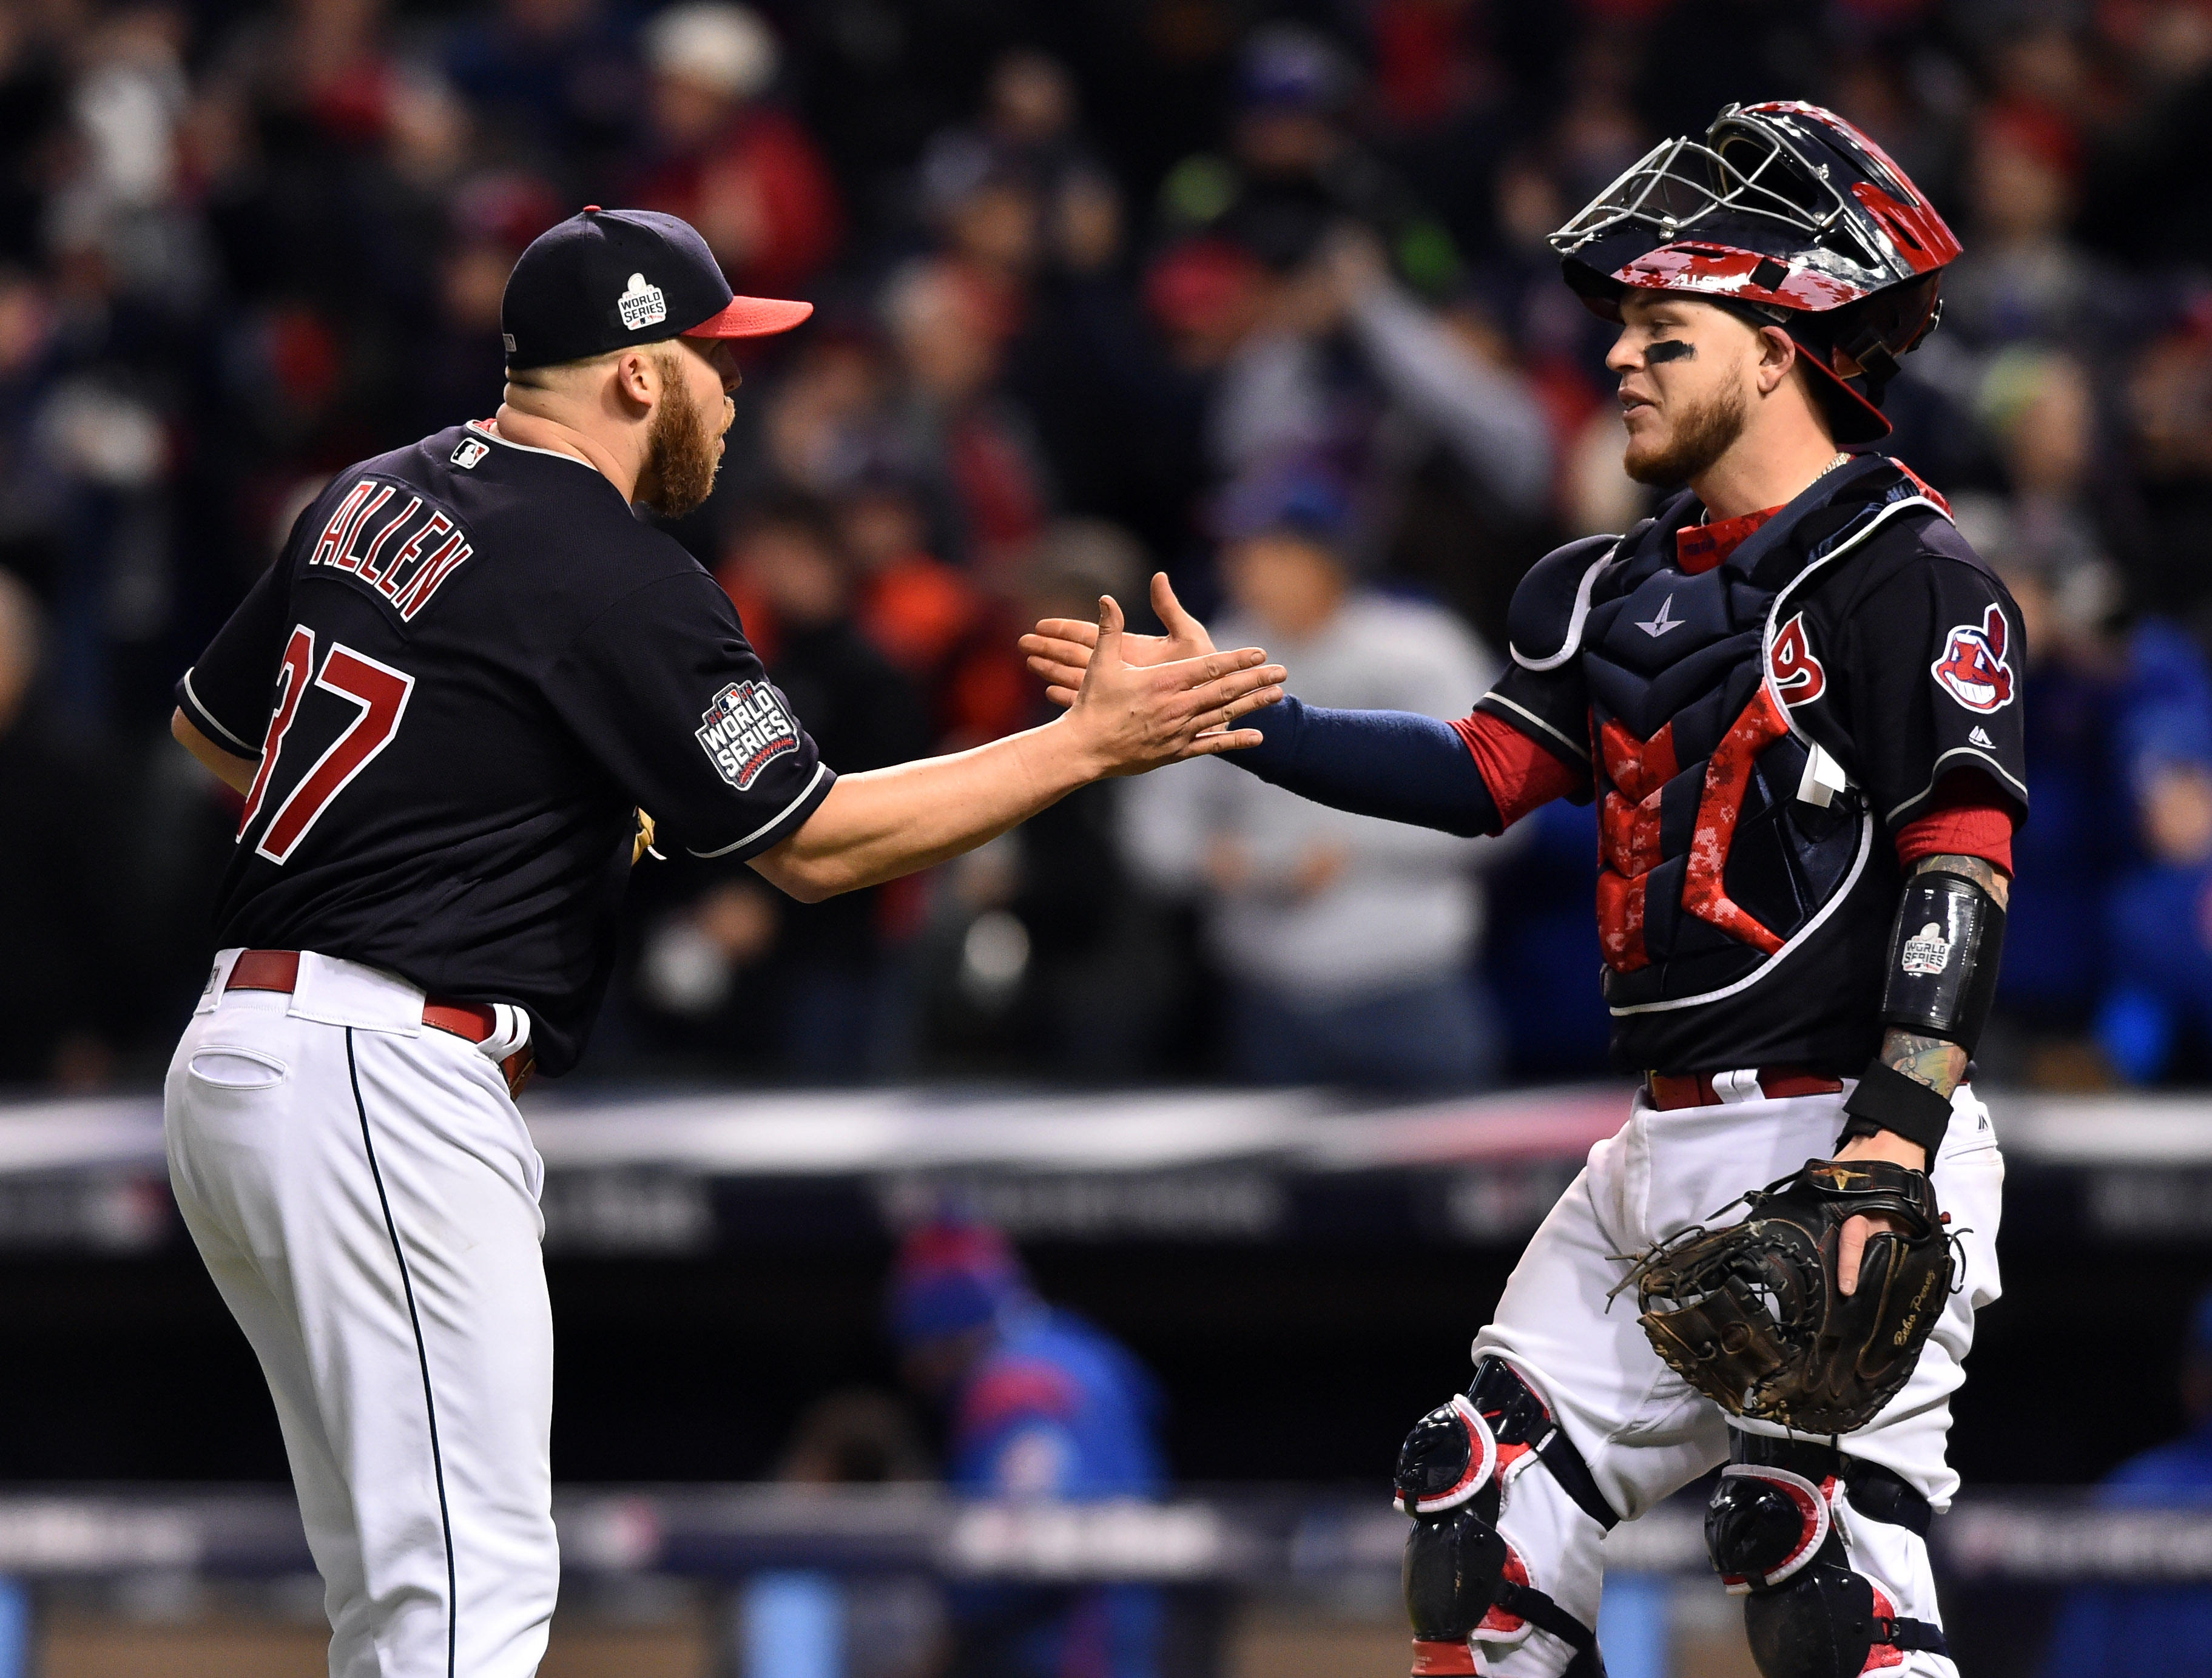 Cleveland Indians defeat Chicago Cubs 6-0 in World Series 2016